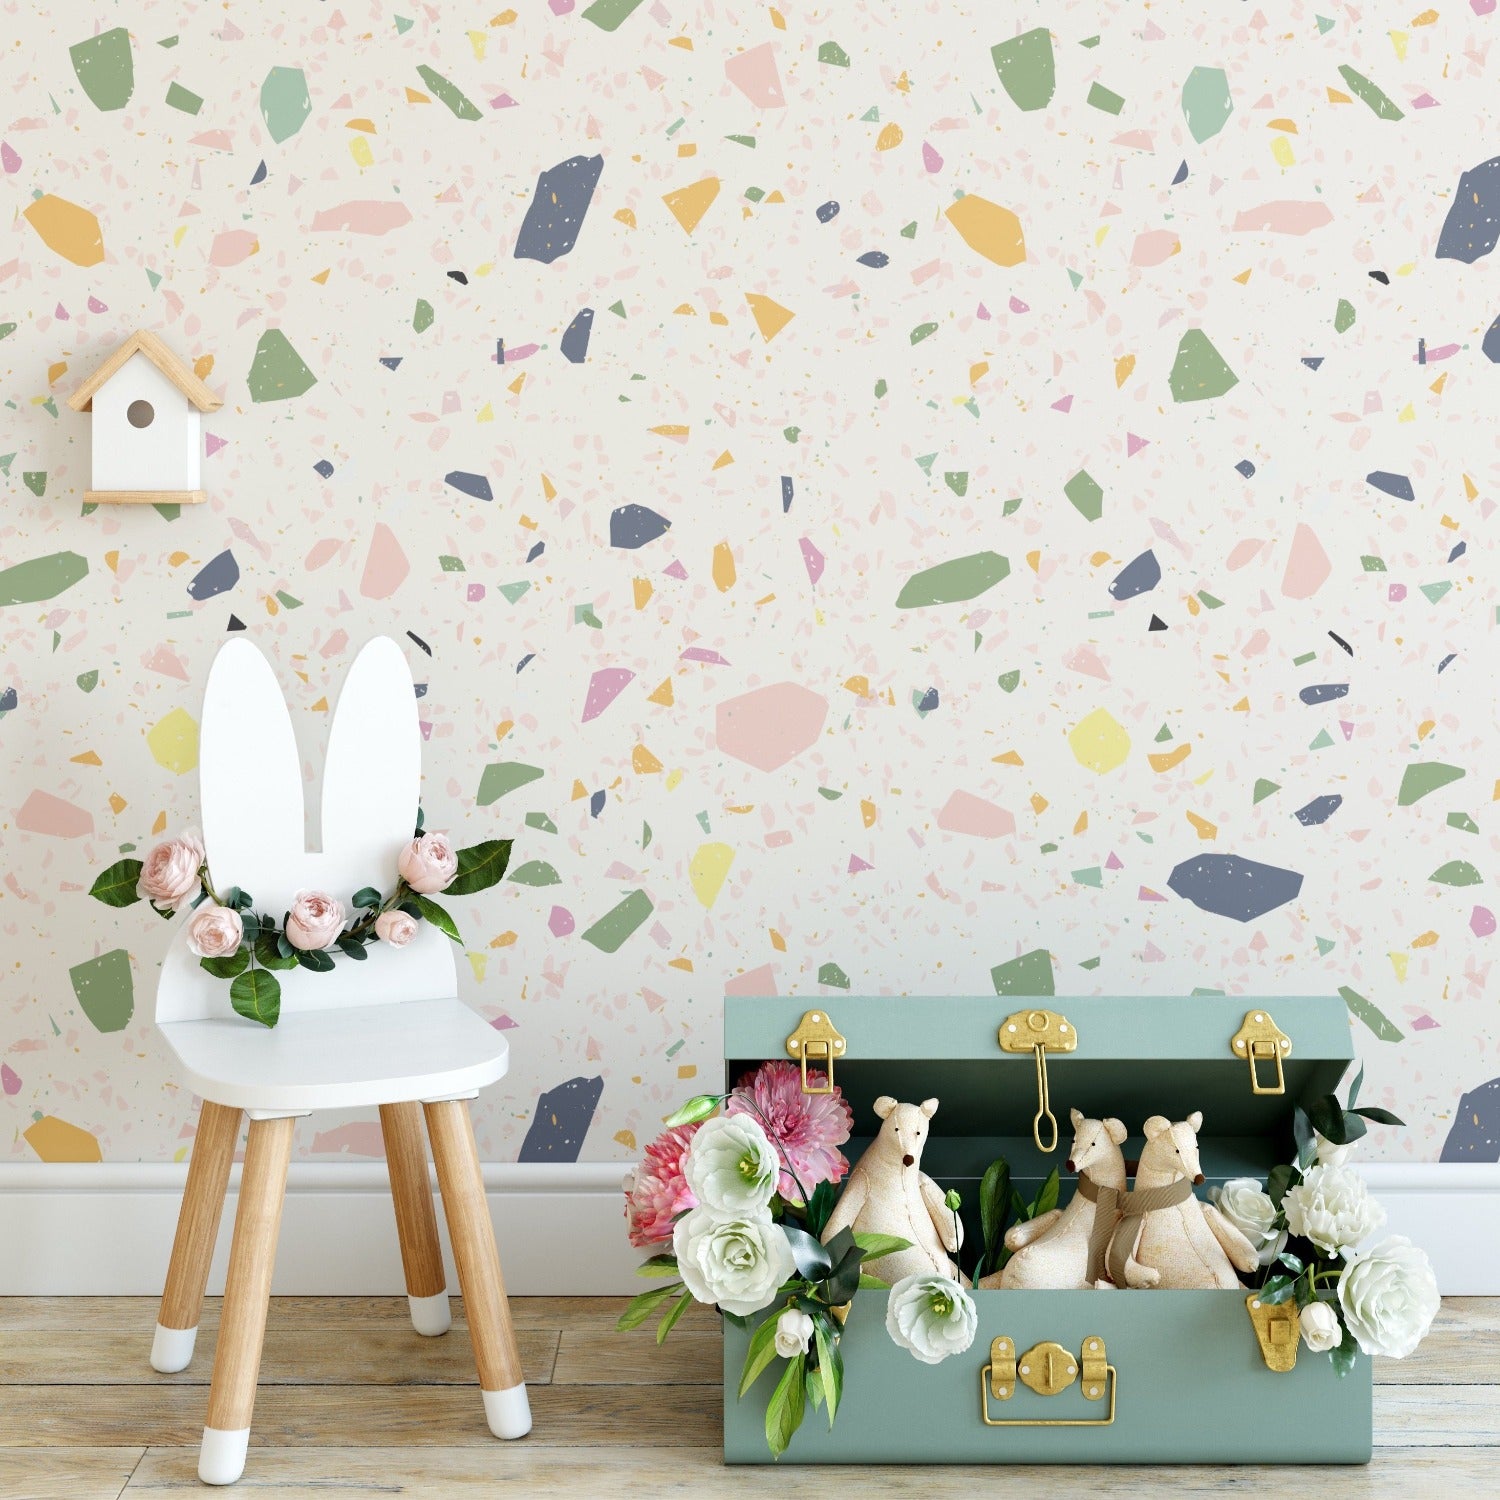 A styled children's room corner with the Cotton Candy Terrazzo wallpaper in the background, adorned with pastel confetti-like patterns. In the foreground, there's a chair with rabbit ears and a storage suitcase with stuffed animal toys and floral decorations, contributing to a playful and inviting atmosphere.